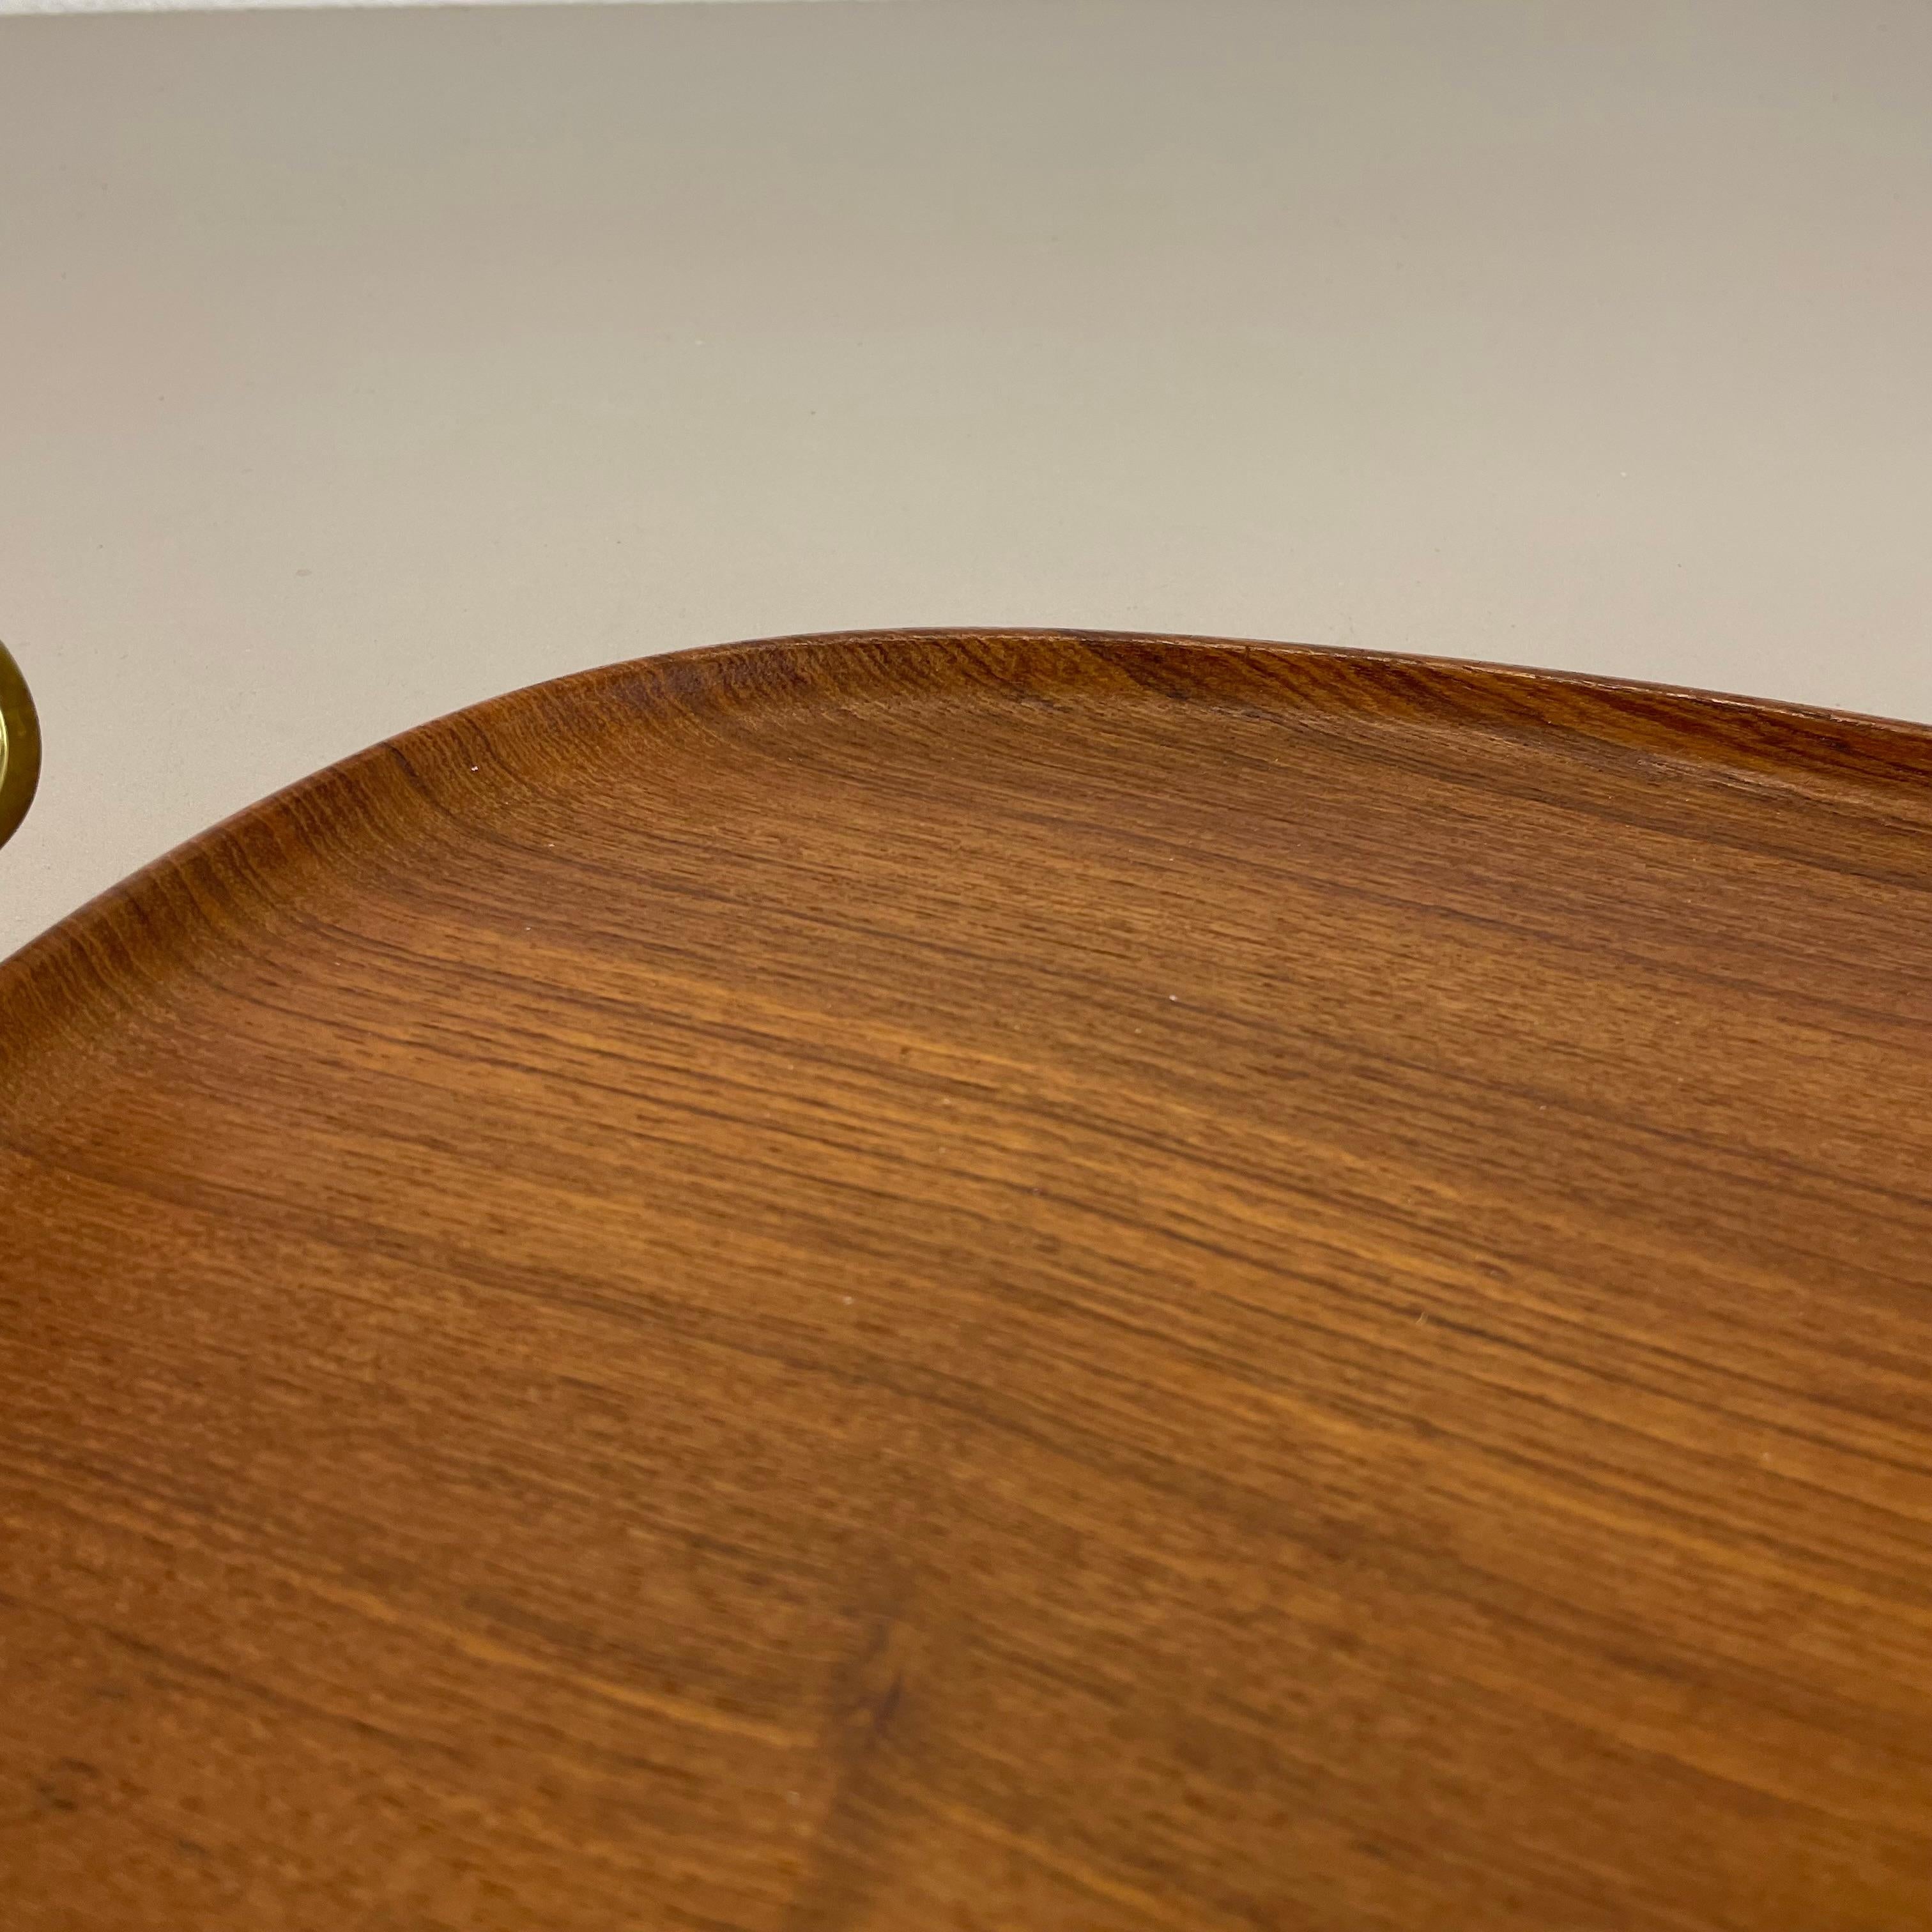 Large TEAK Tray Plate Element with Brass Handle by Carl Auböck, Austria, 1950s For Sale 4